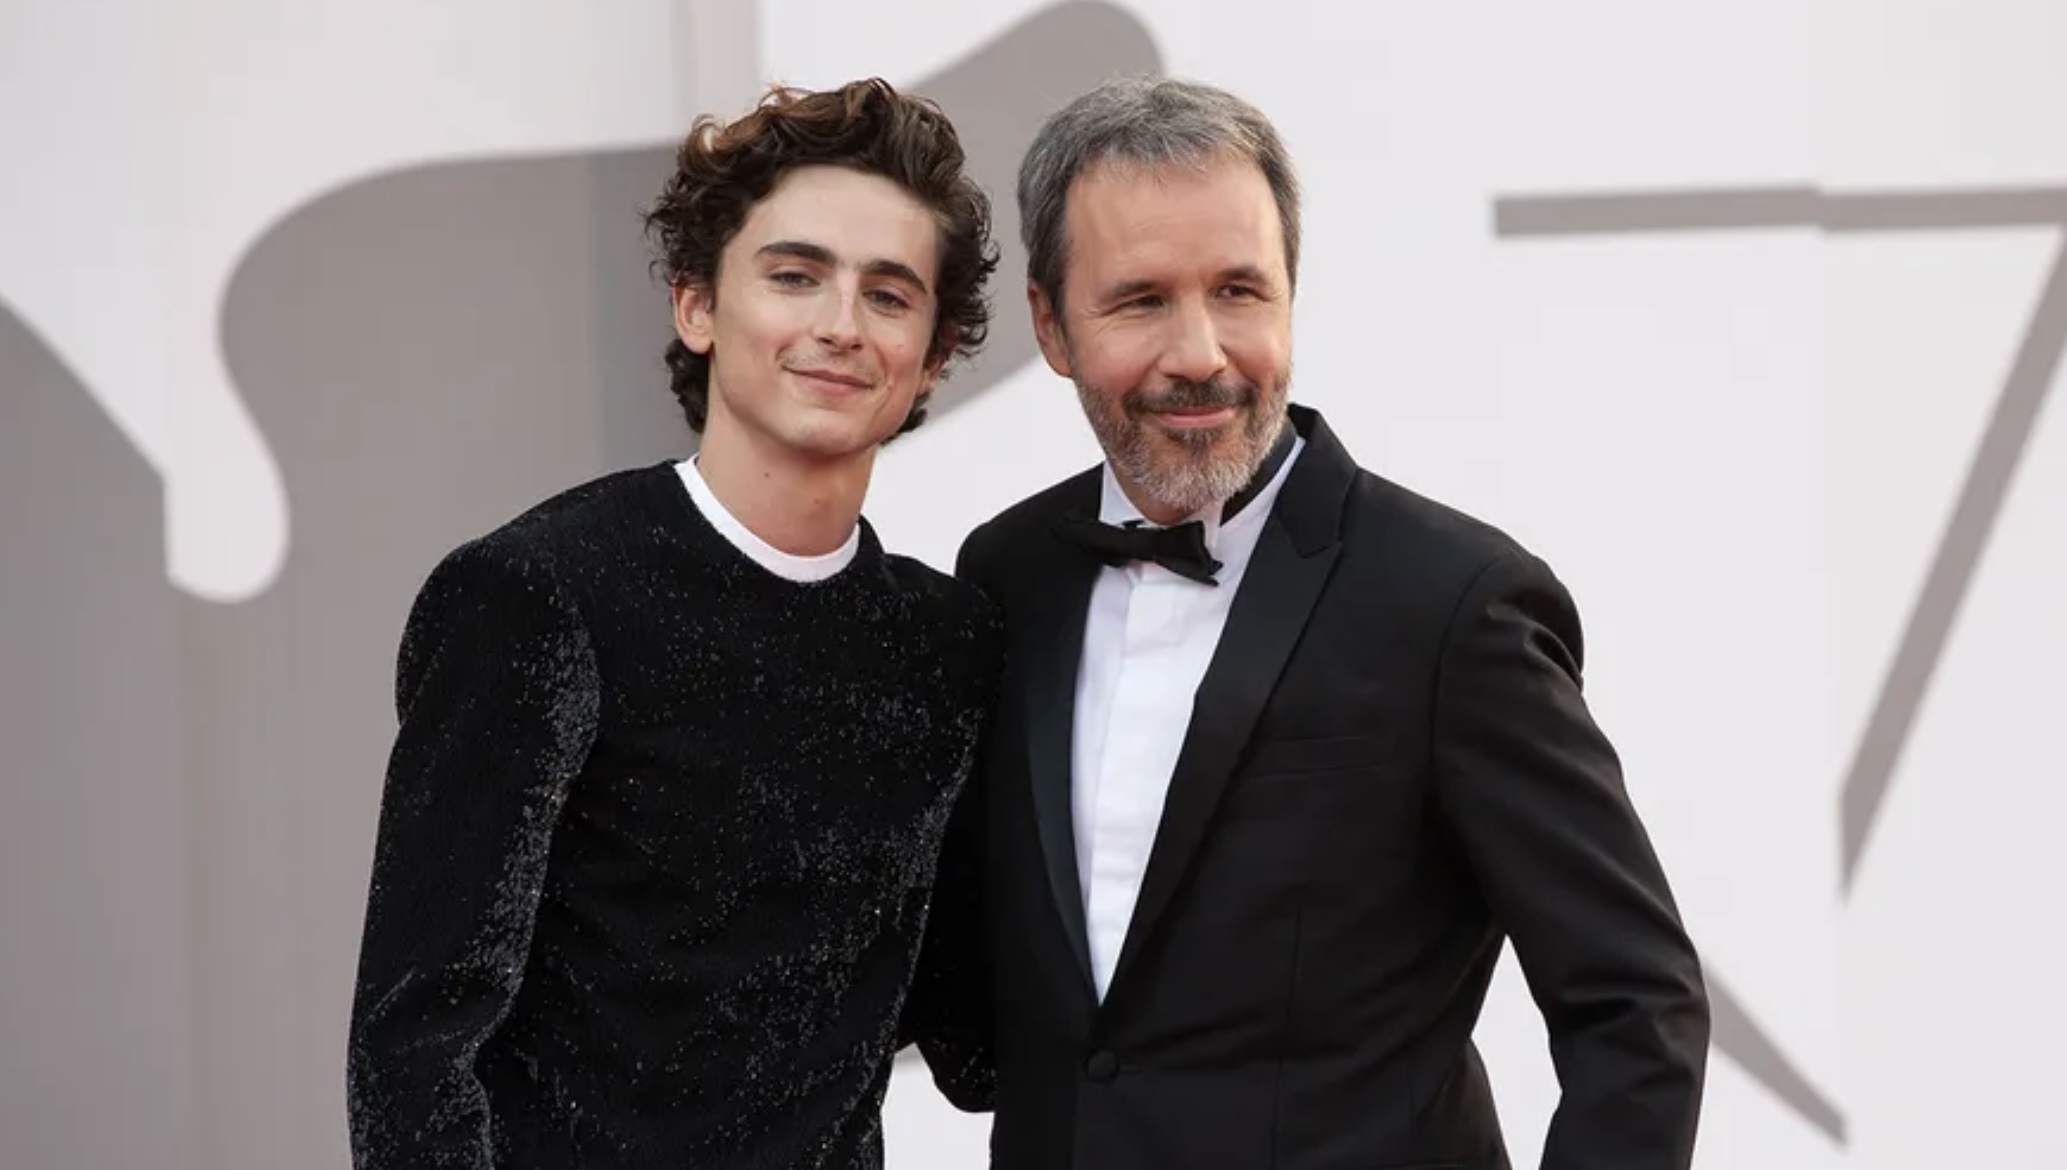 Denis Villeneuve’s whole career has been leading up to Dune